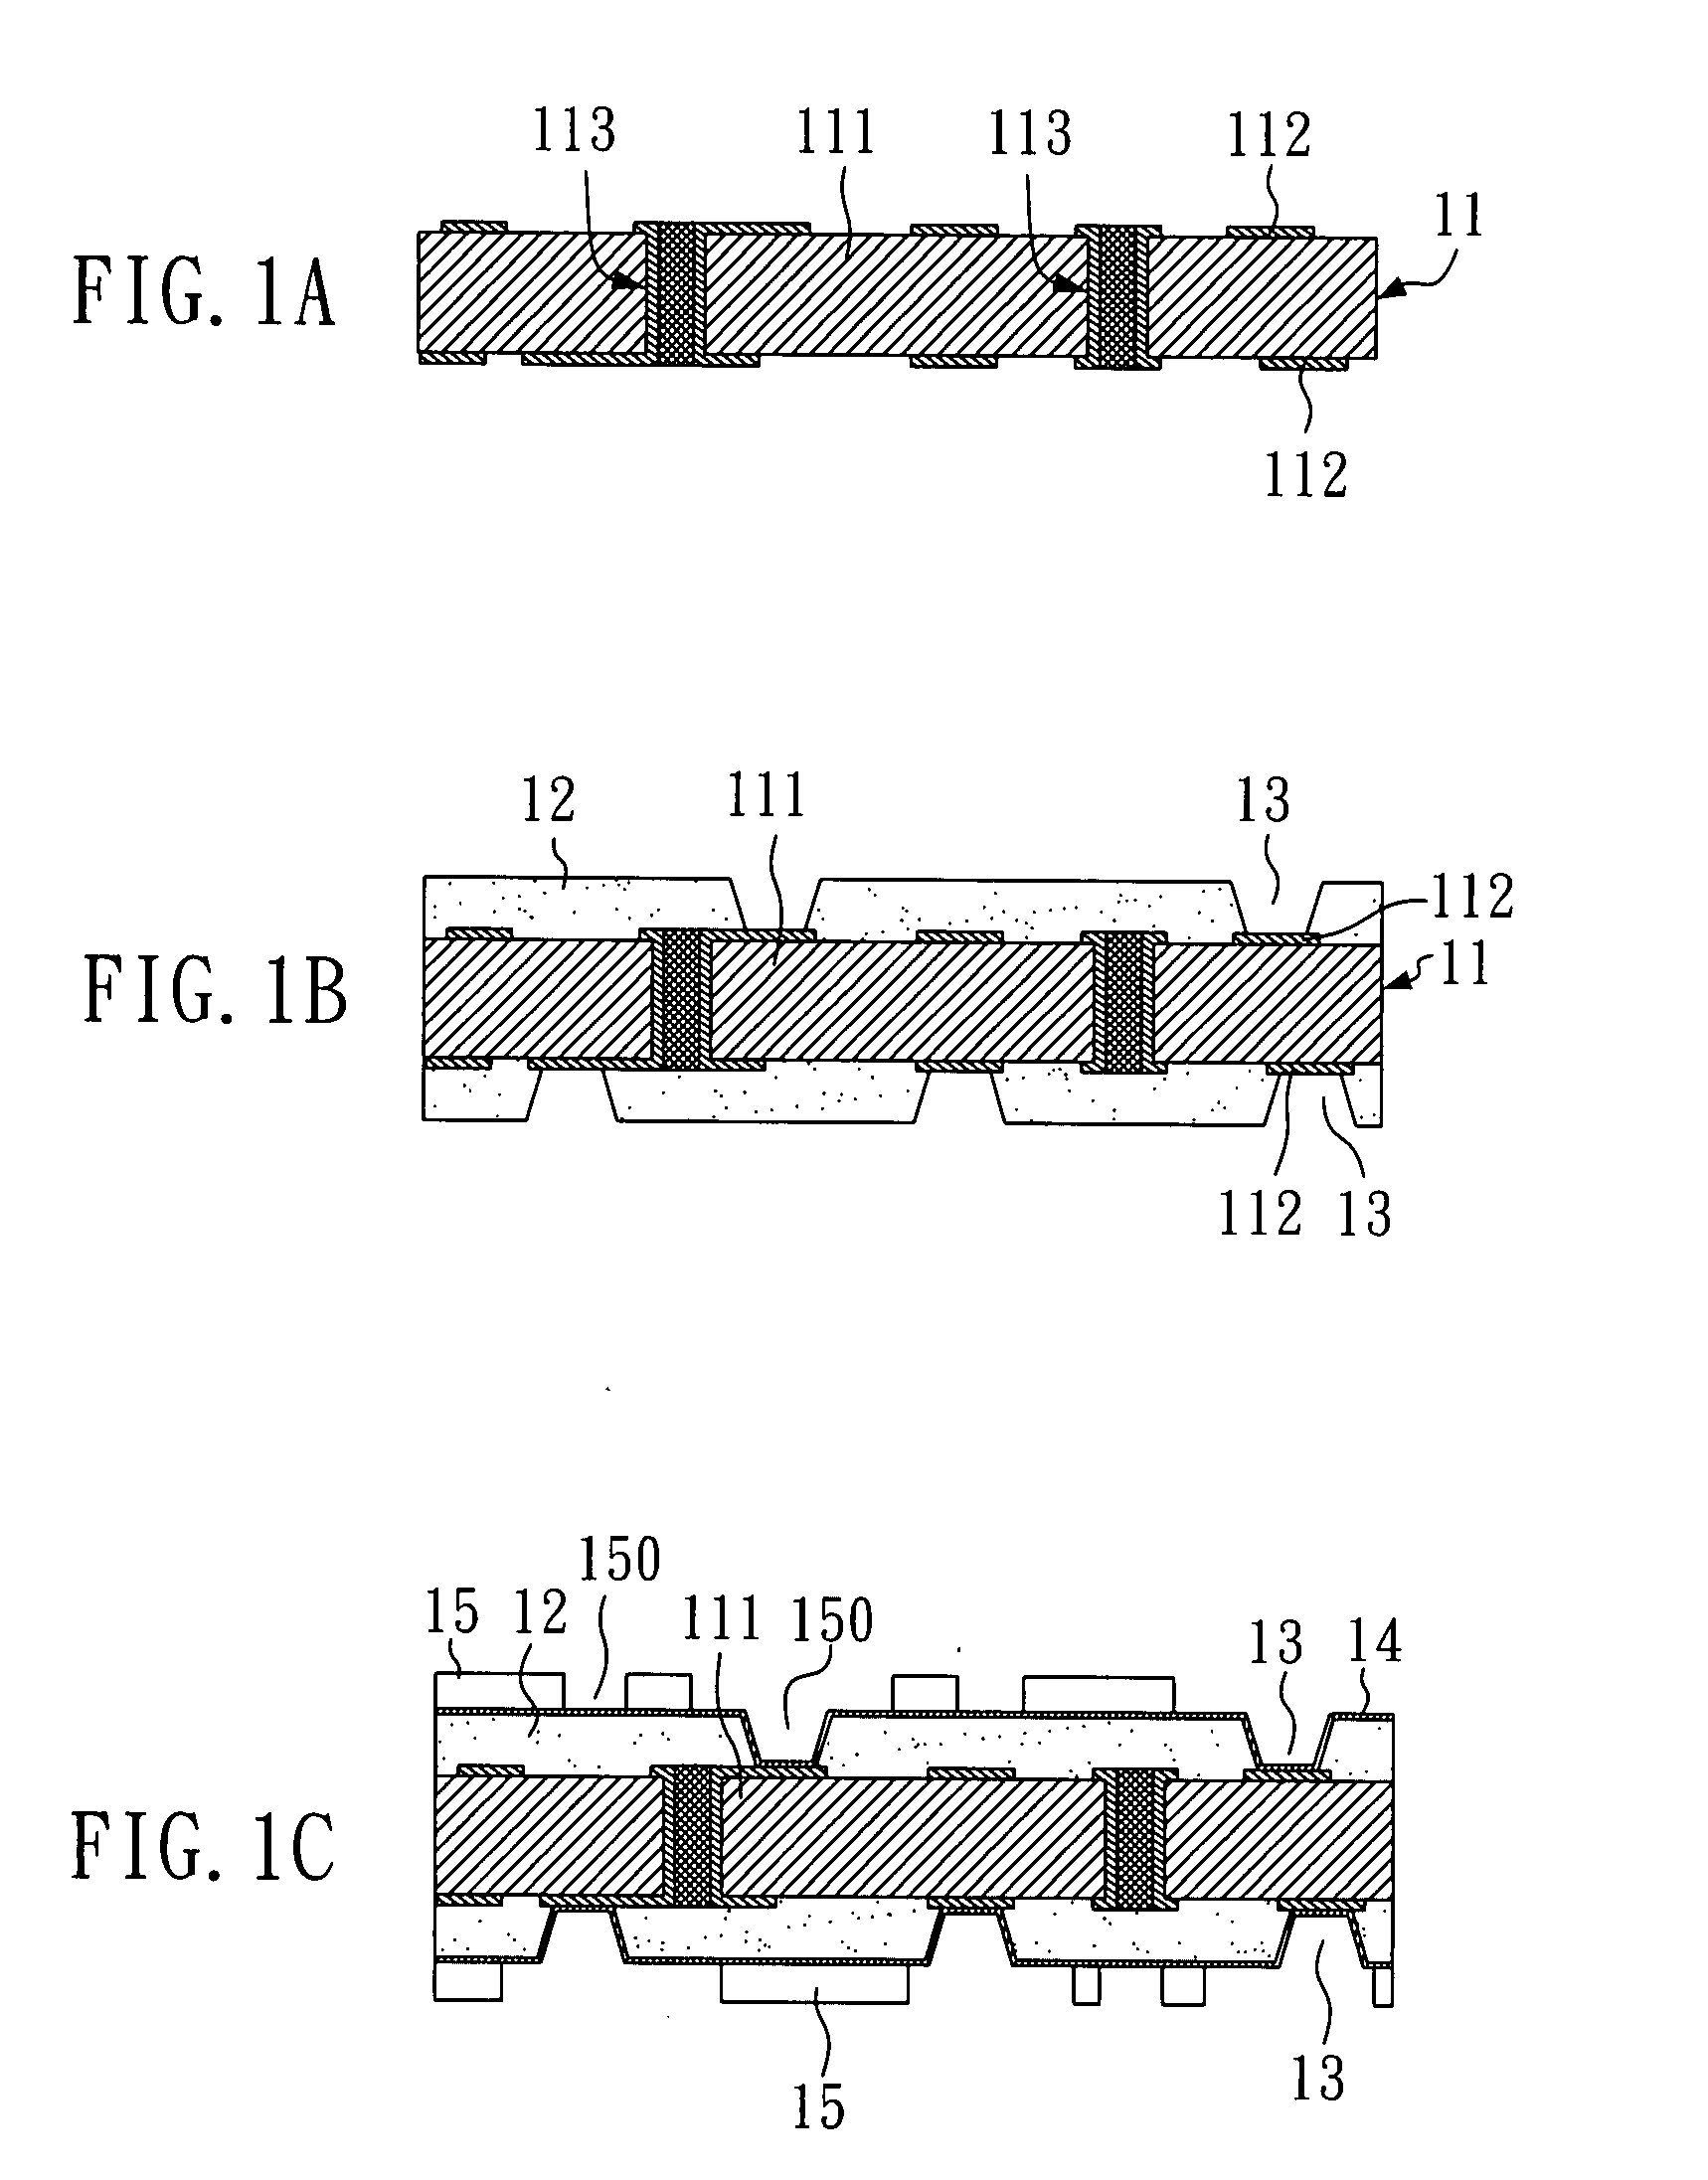 Flip-chip package substrate and a method for fabricating the same